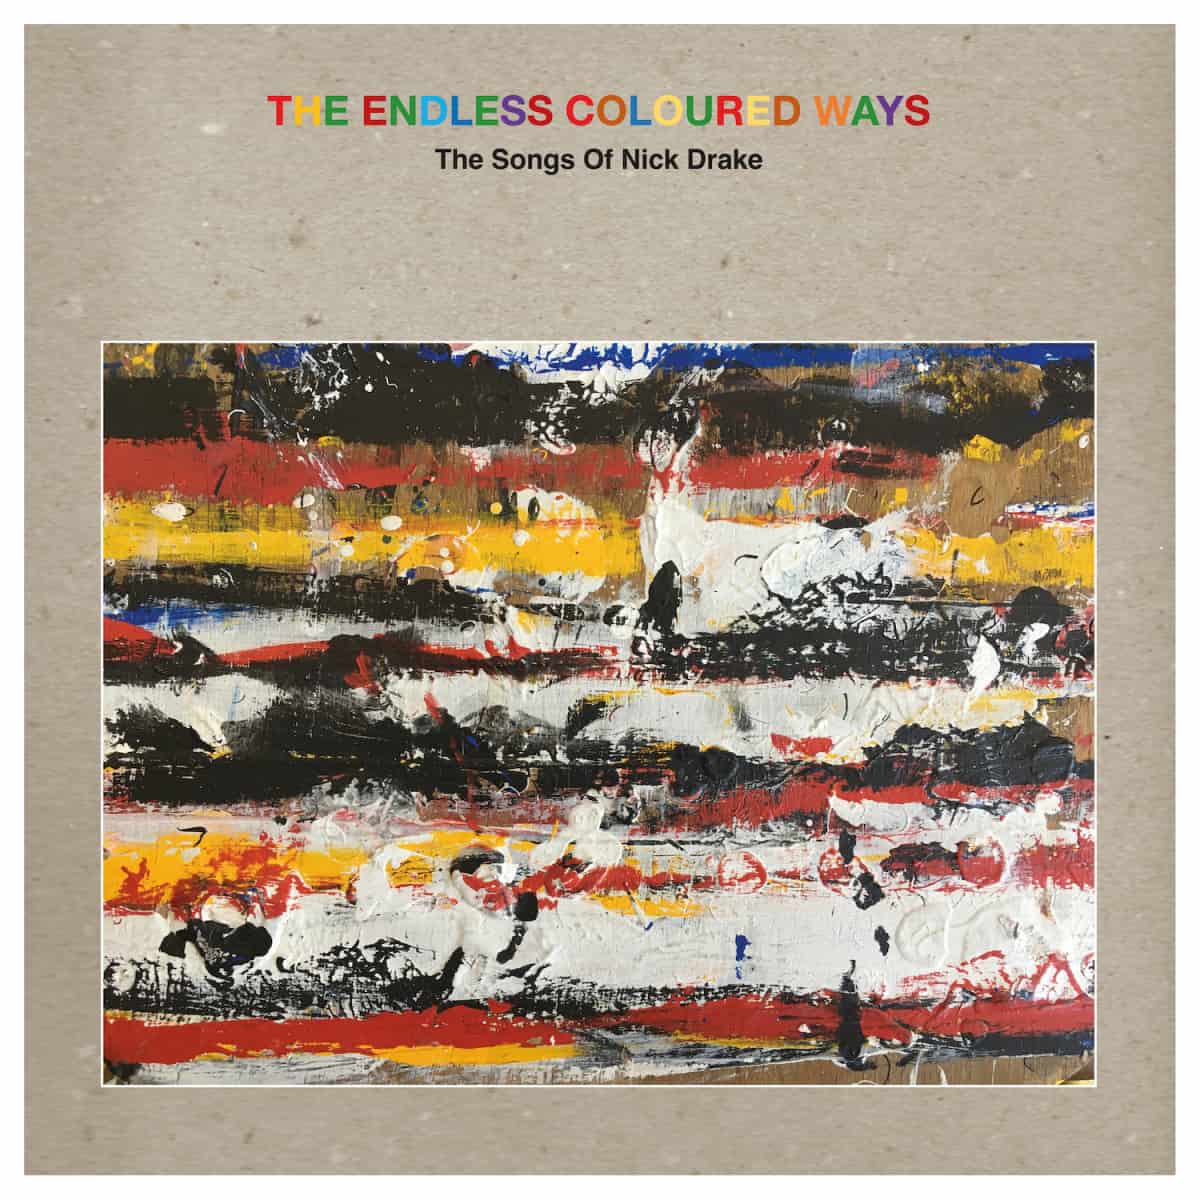 Review of The Endless Coloured Ways